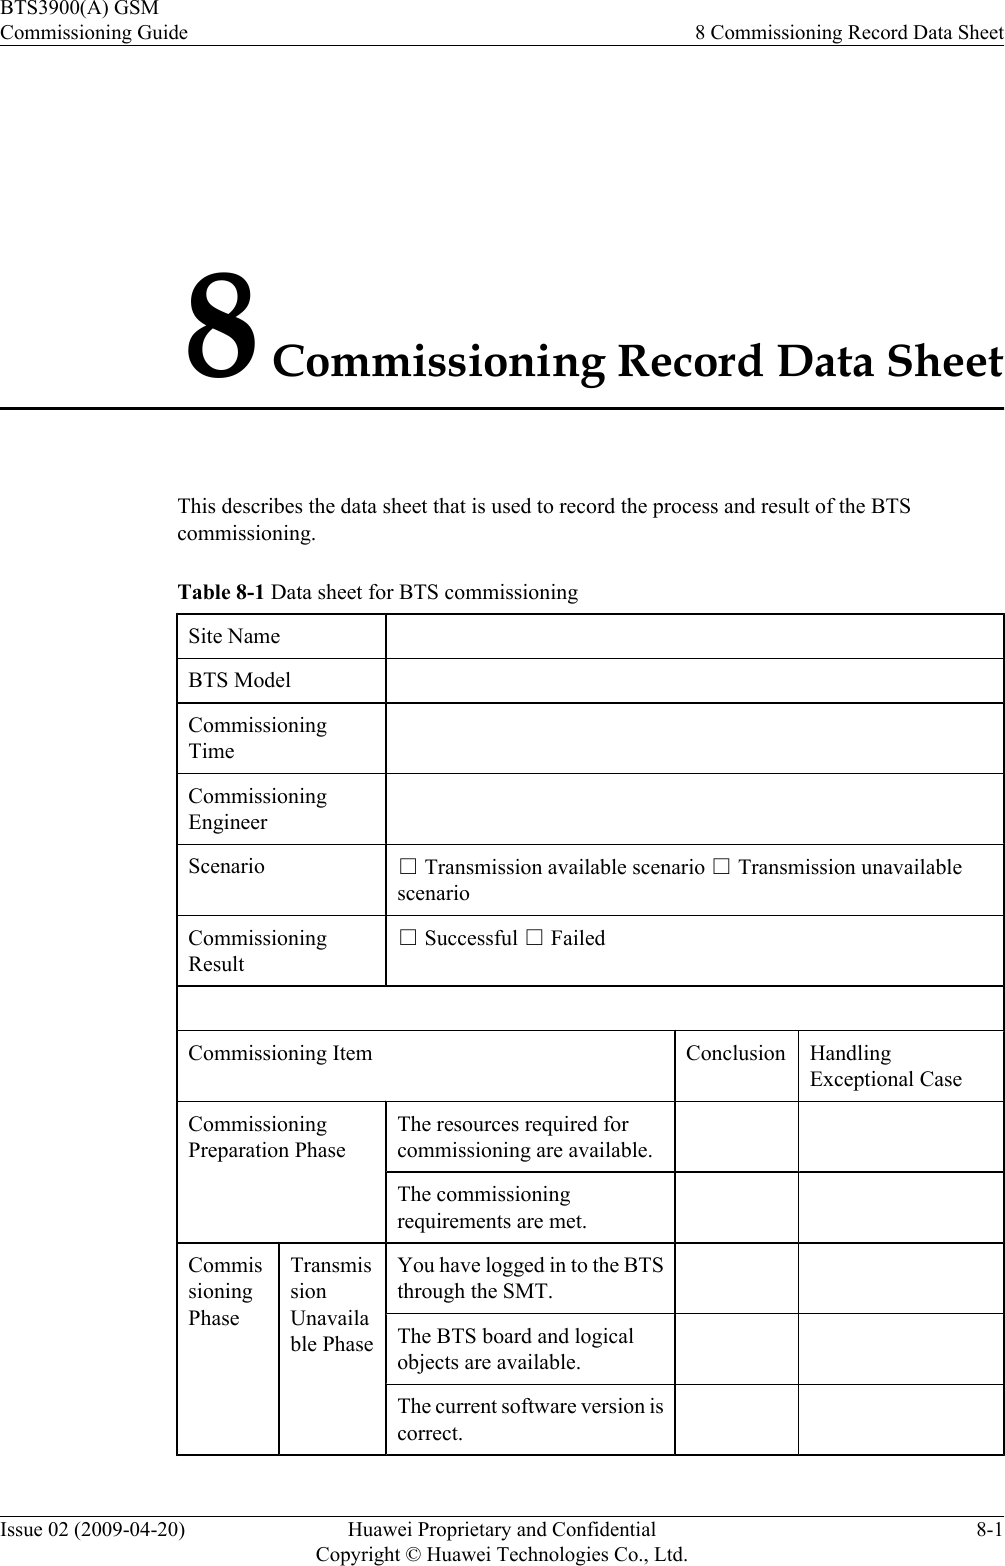 8 Commissioning Record Data SheetThis describes the data sheet that is used to record the process and result of the BTScommissioning.Table 8-1 Data sheet for BTS commissioningSite Name  BTS Model  CommissioningTime CommissioningEngineer Scenario □ Transmission available scenario □ Transmission unavailablescenarioCommissioningResult□ Successful □ Failed Commissioning Item Conclusion HandlingExceptional CaseCommissioningPreparation PhaseThe resources required forcommissioning are available.   The commissioningrequirements are met.   CommissioningPhaseTransmissionUnavailable PhaseYou have logged in to the BTSthrough the SMT.   The BTS board and logicalobjects are available.   The current software version iscorrect.   BTS3900(A) GSMCommissioning Guide 8 Commissioning Record Data SheetIssue 02 (2009-04-20) Huawei Proprietary and ConfidentialCopyright © Huawei Technologies Co., Ltd.8-1